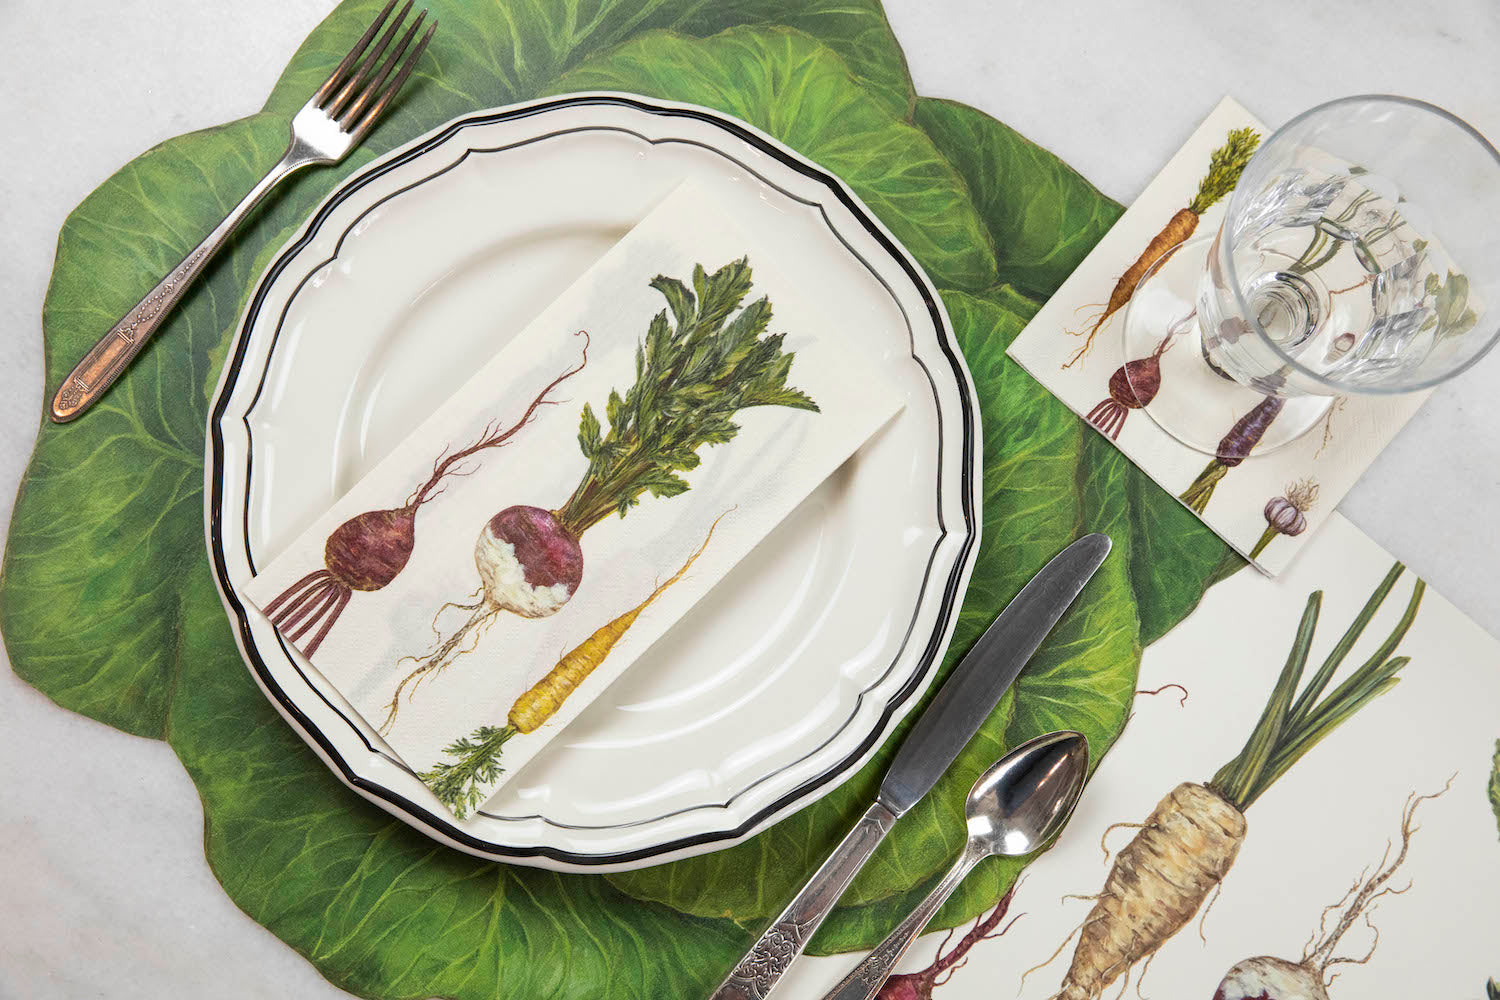 A placemat adorned with a bountiful display of harvest vegetables, sourced from local farmers&